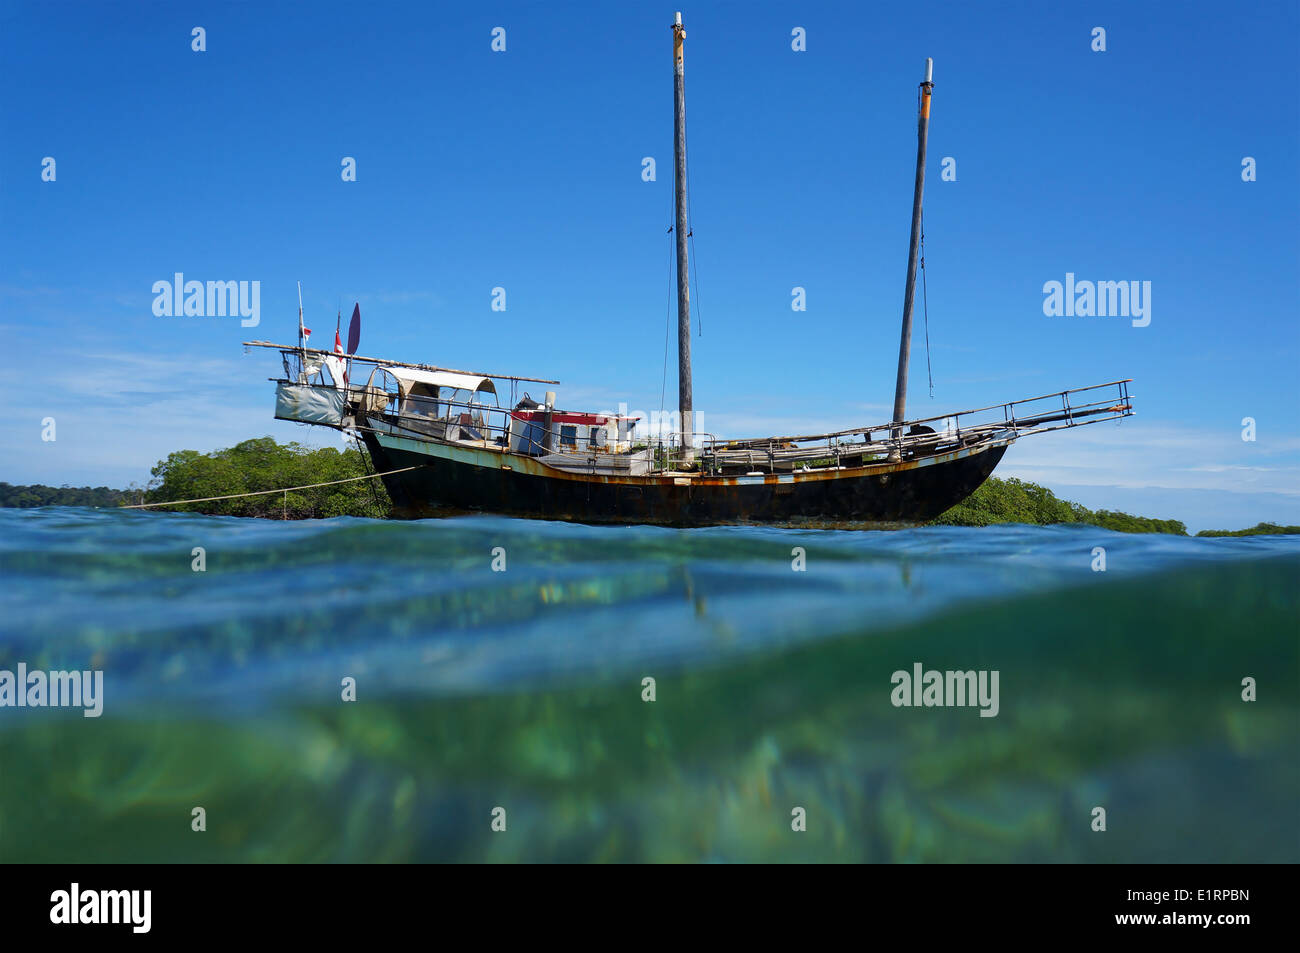 Old sailing boat stranded on a shallow reef, viewed from water surface, Caribbean sea Stock Photo